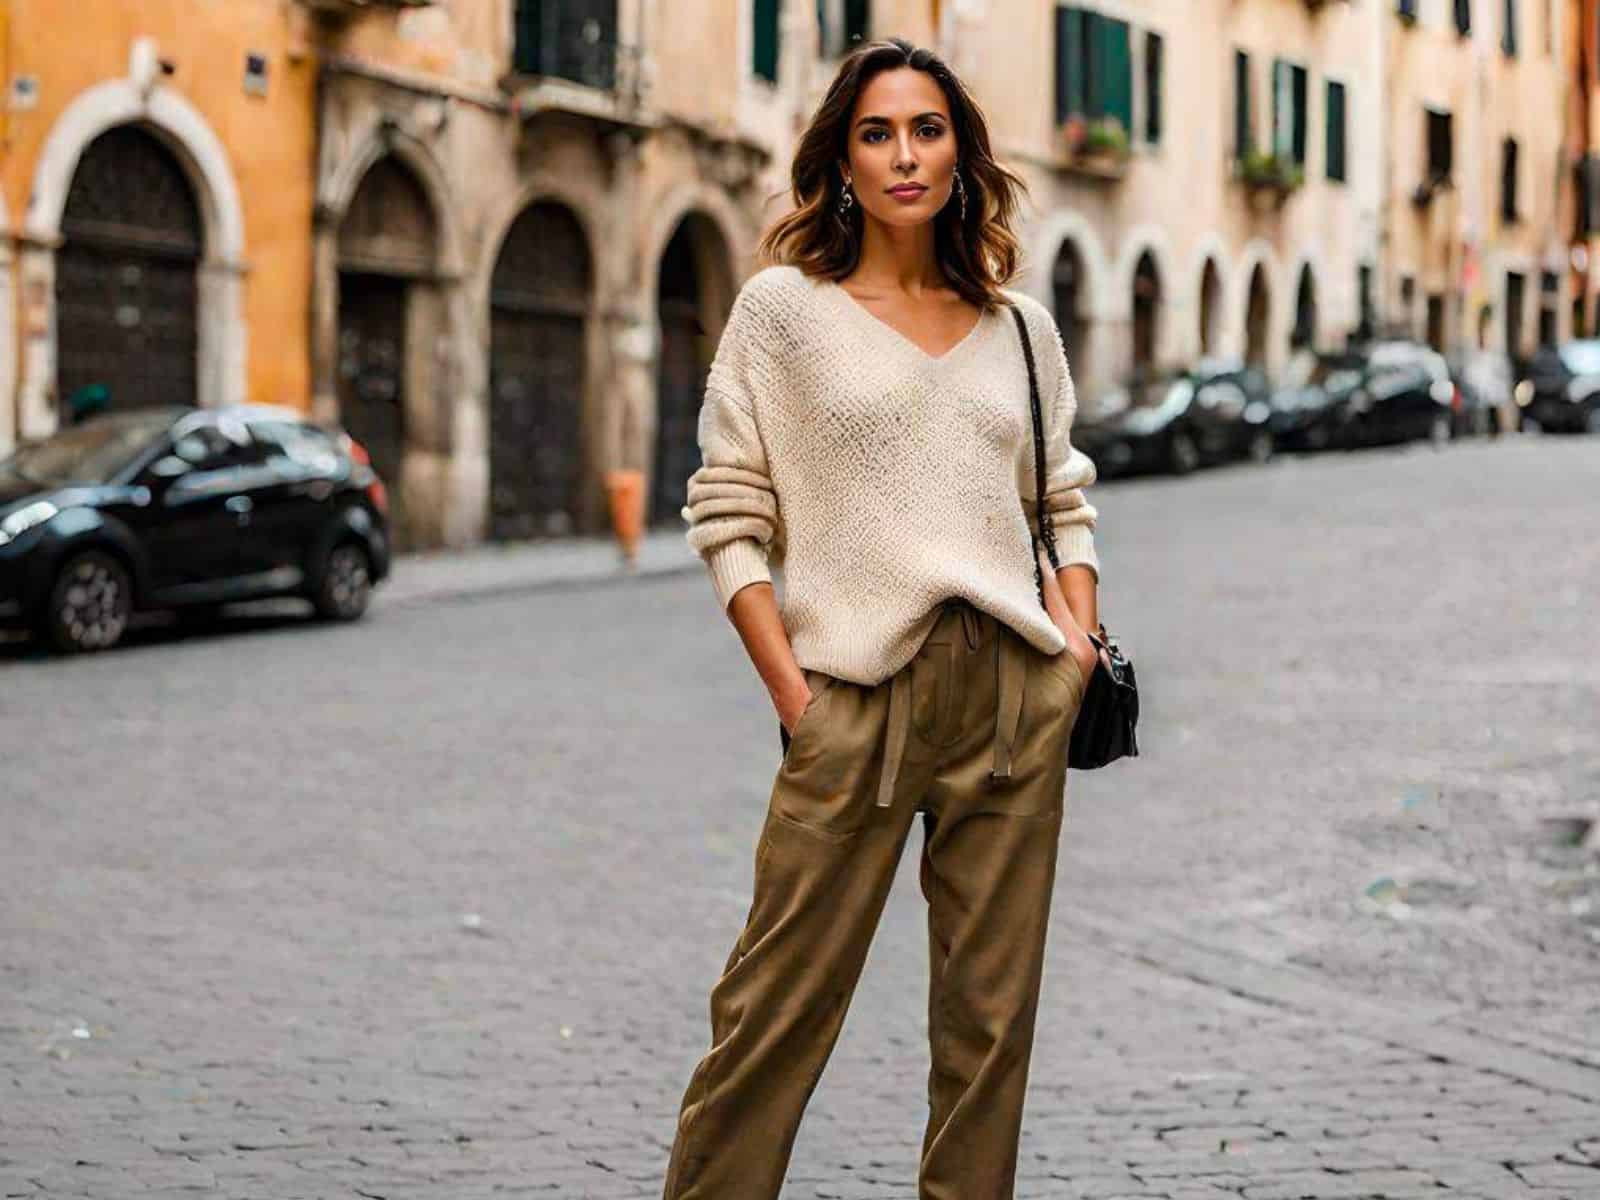 <p>If you are traveling in Europe, one of the most commonly asked questions is “how should I dress”. The reason is simple, Europeans are known to be well-dressed, so you want to look put together too! Here we have 25 chic and comfortable outfits that you can wear when in Europe, and they will make you look like the locals instead of tourists.</p>